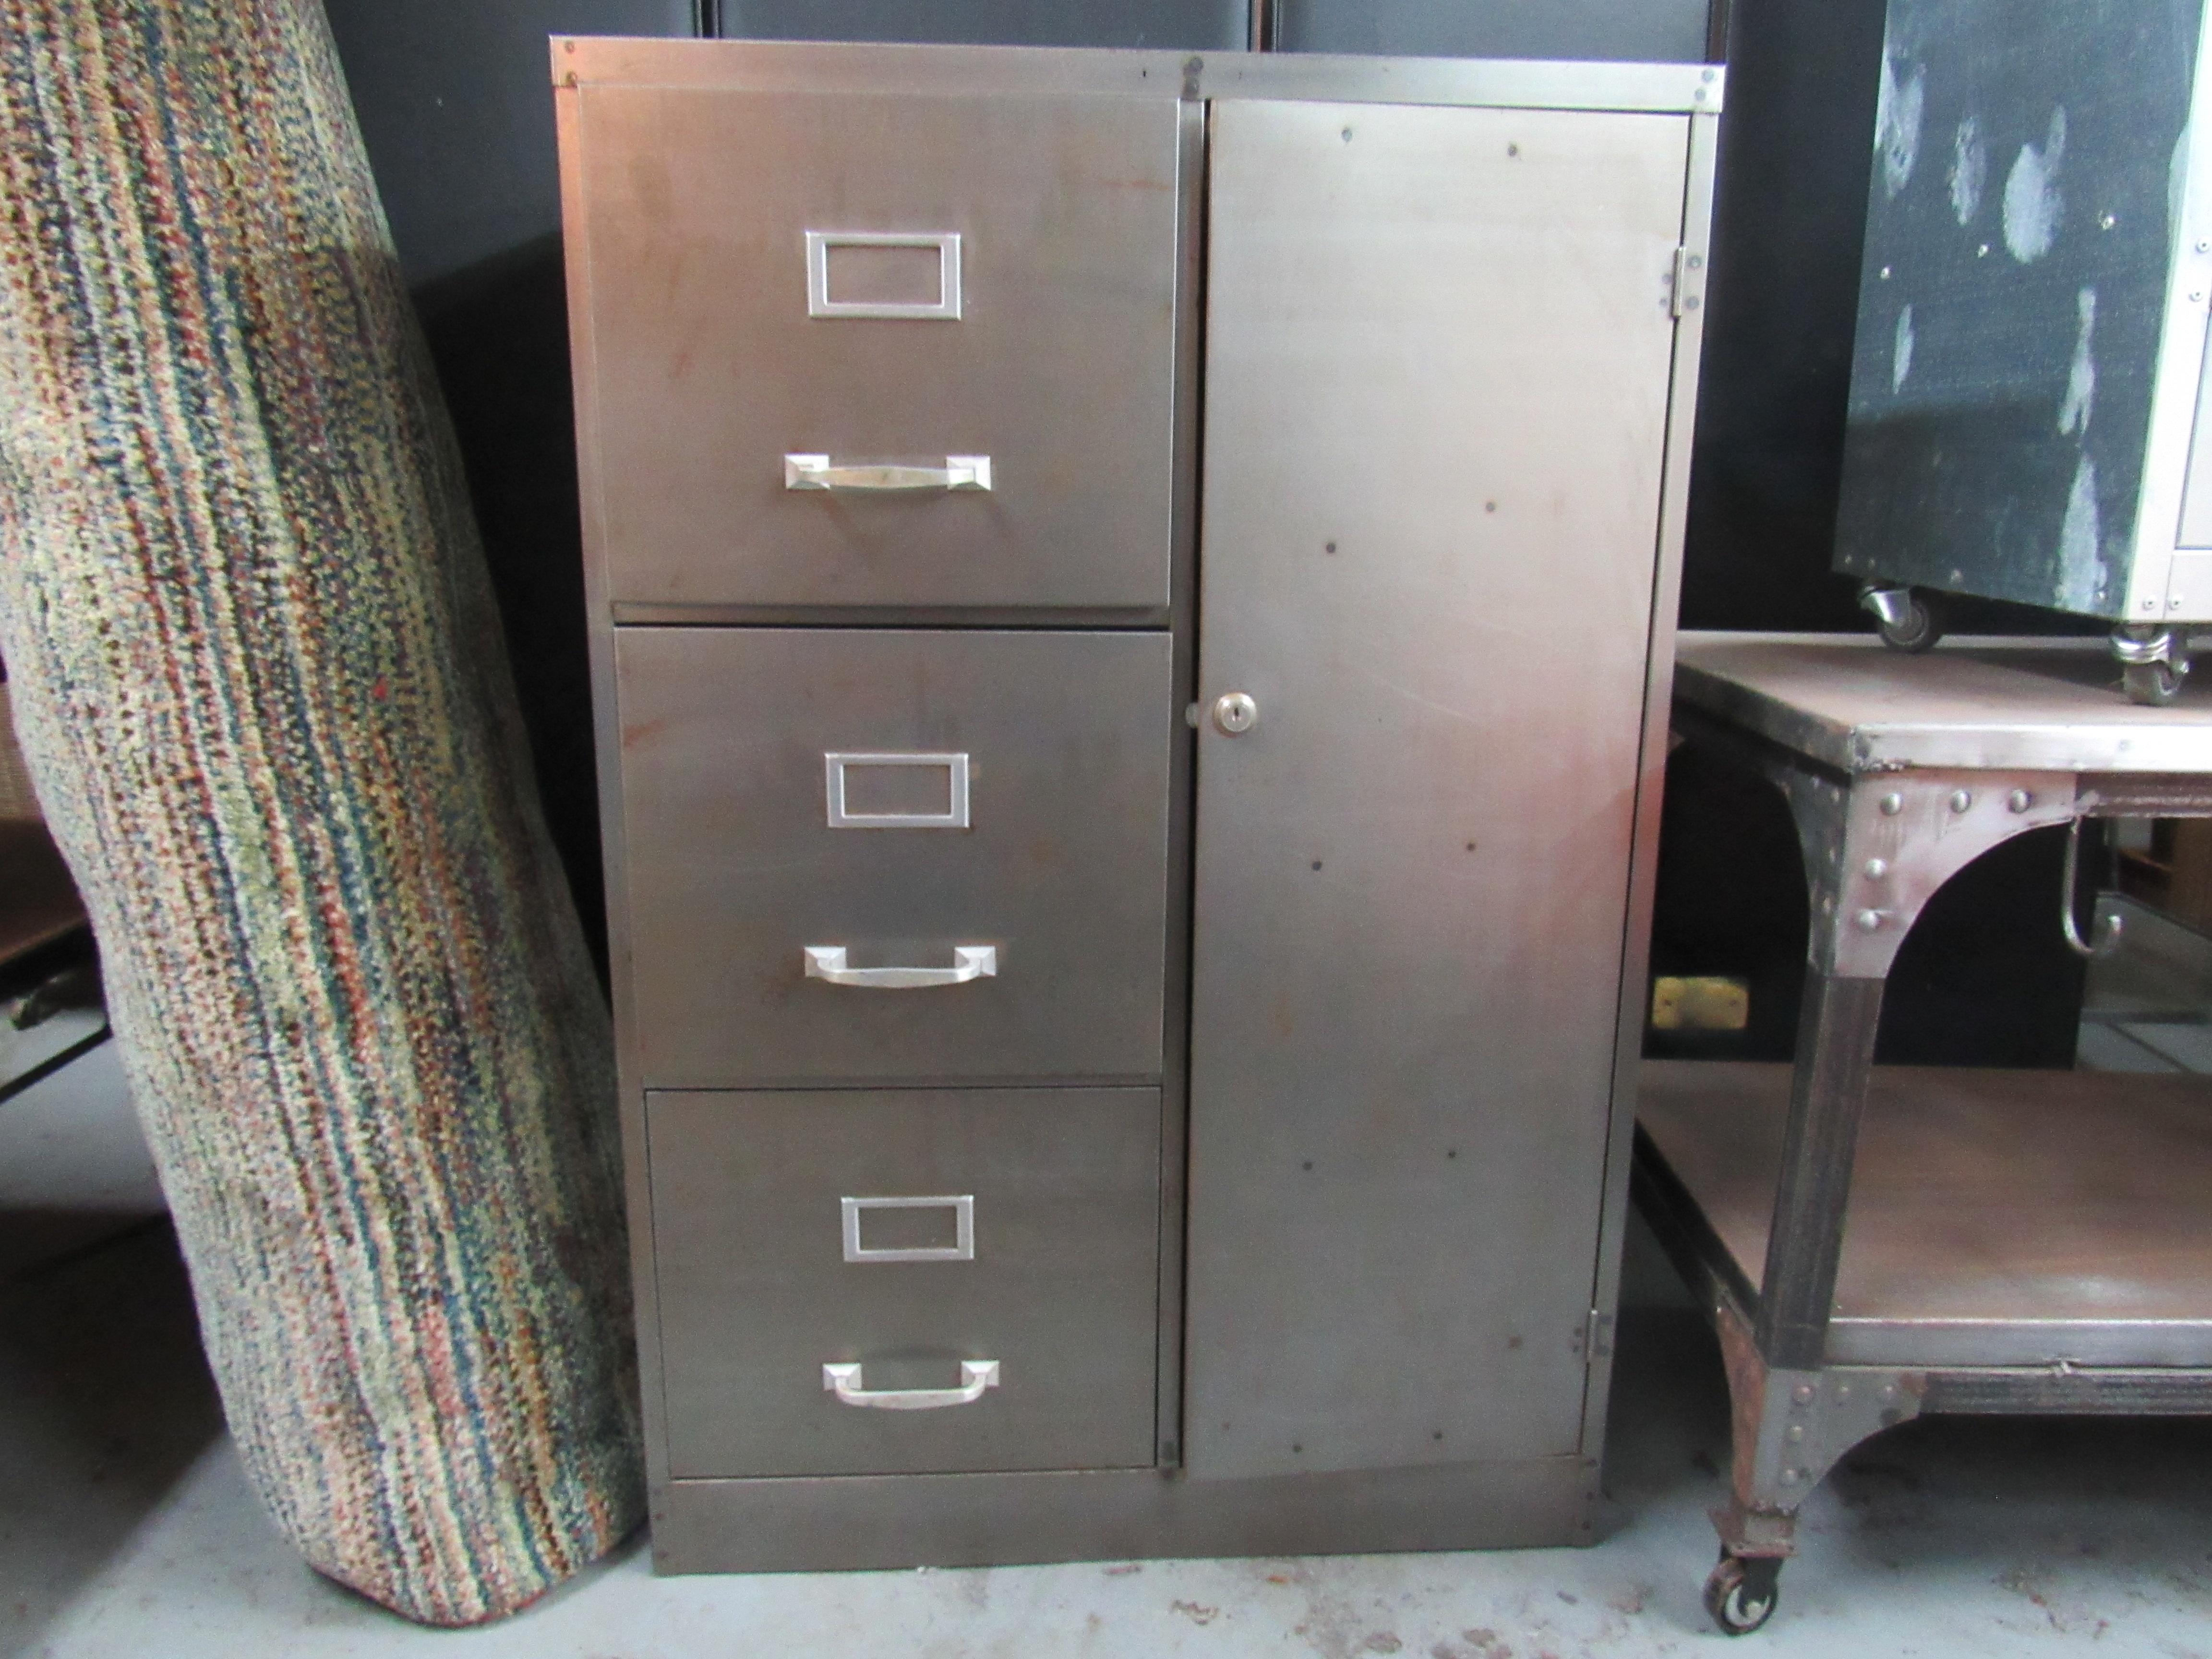 With three large drawers, shelving compartments, and a built-in safe, this vintage industrial cabinet is a great way to add organization to a space with unique style. Please confirm item location with seller (NY/NJ).